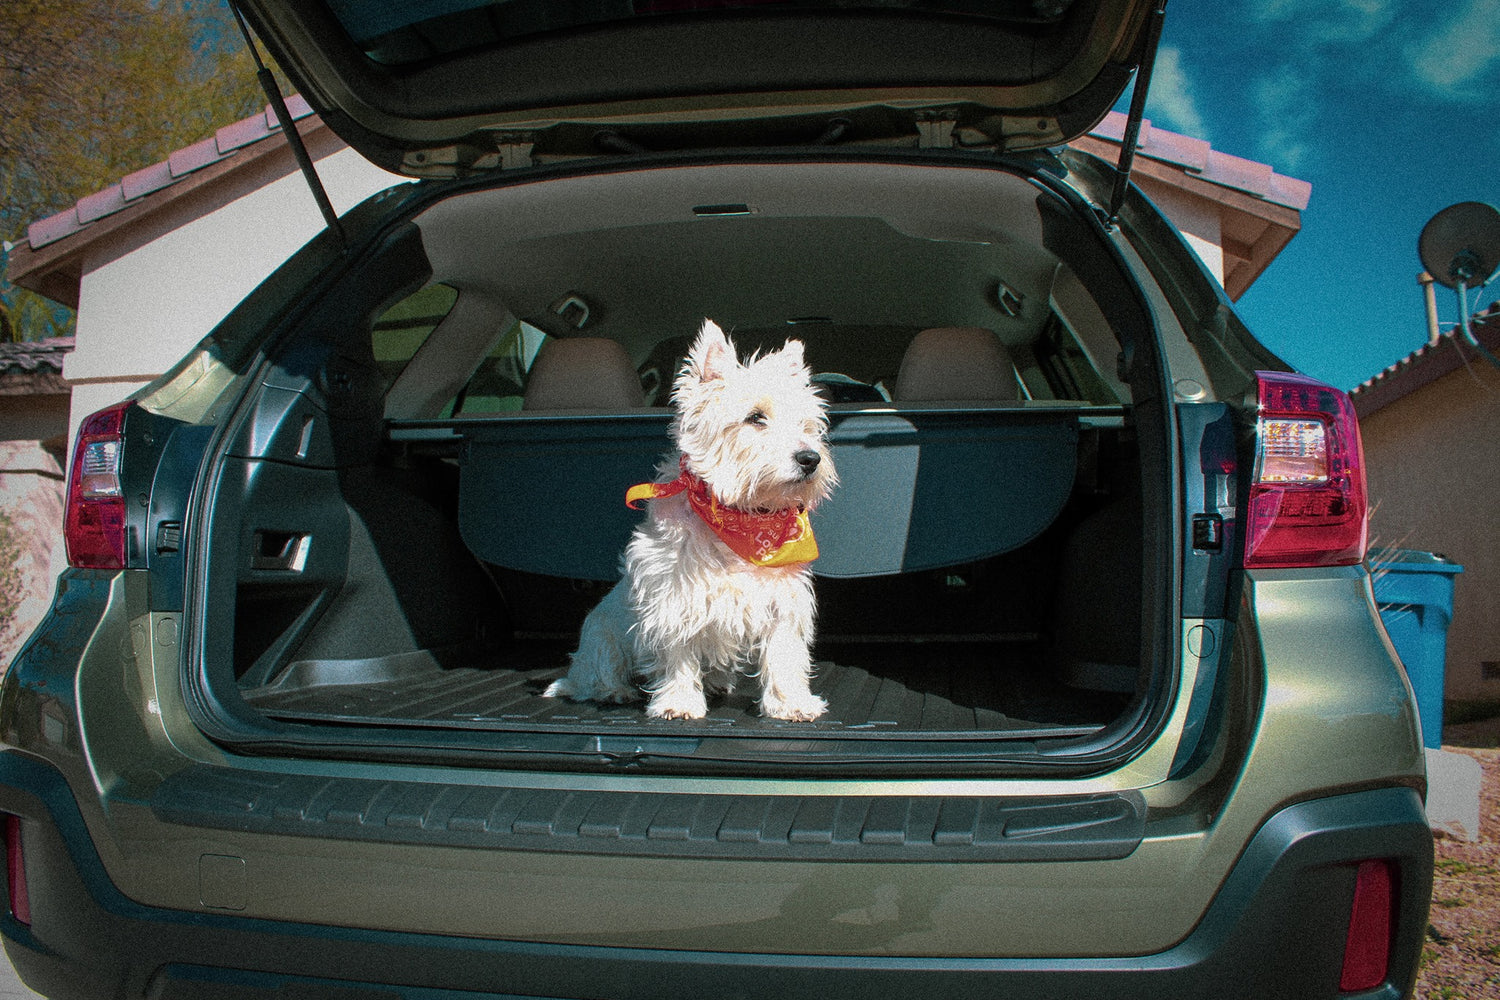 Skip, the Westhighland White Terrier, ready for adventure in the Subaru Outback, Adventure Dog Coffee Company